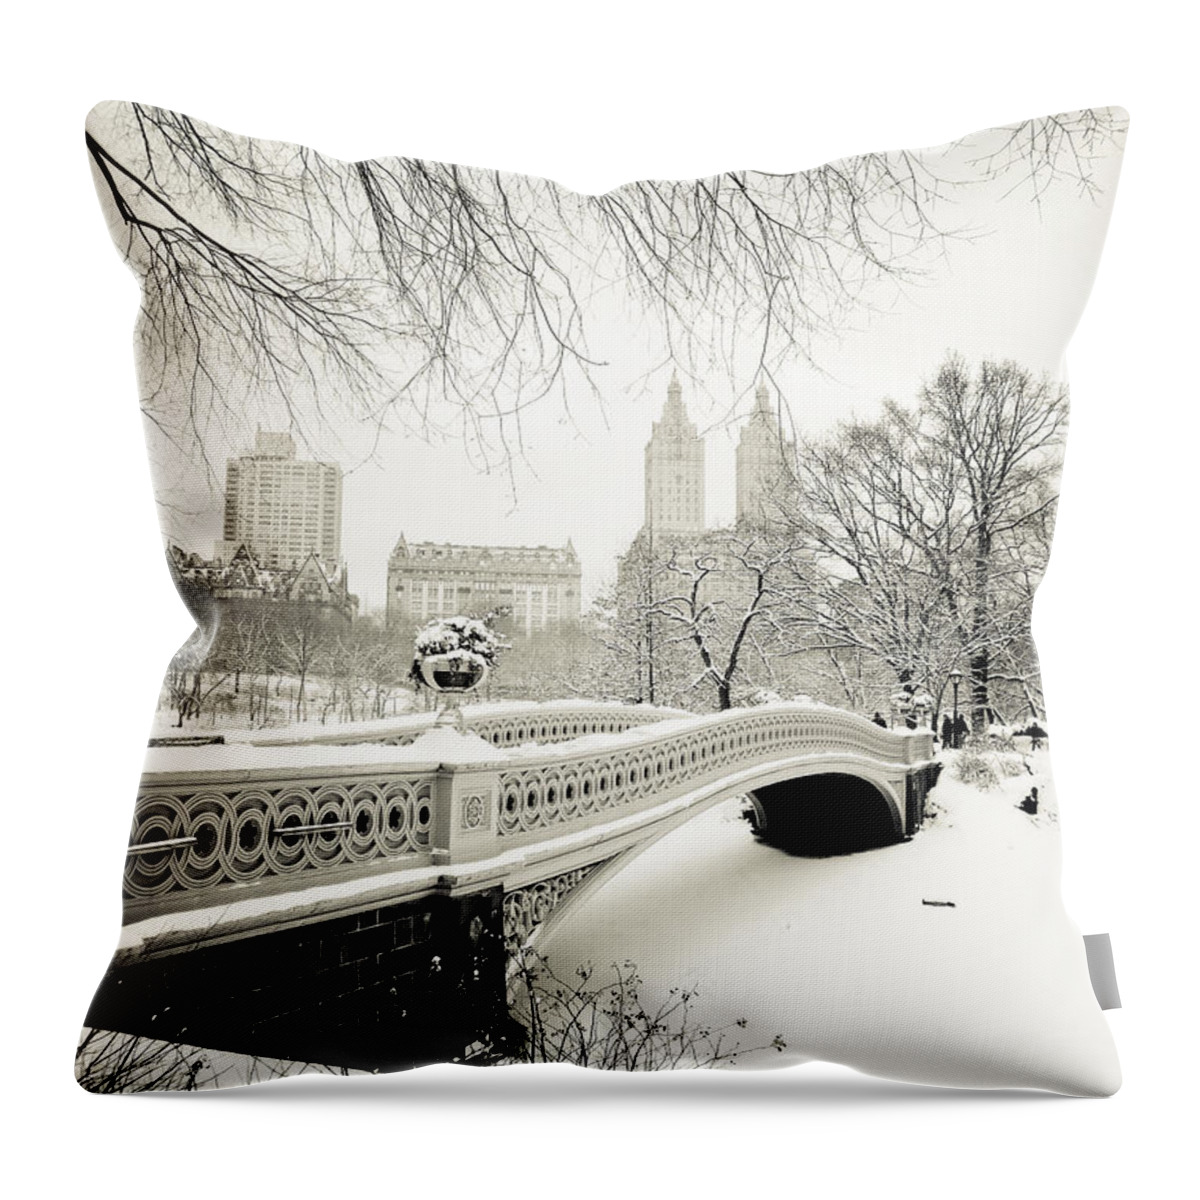 New York City Throw Pillow featuring the photograph Winter's Touch - Bow Bridge - Central Park - New York City by Vivienne Gucwa